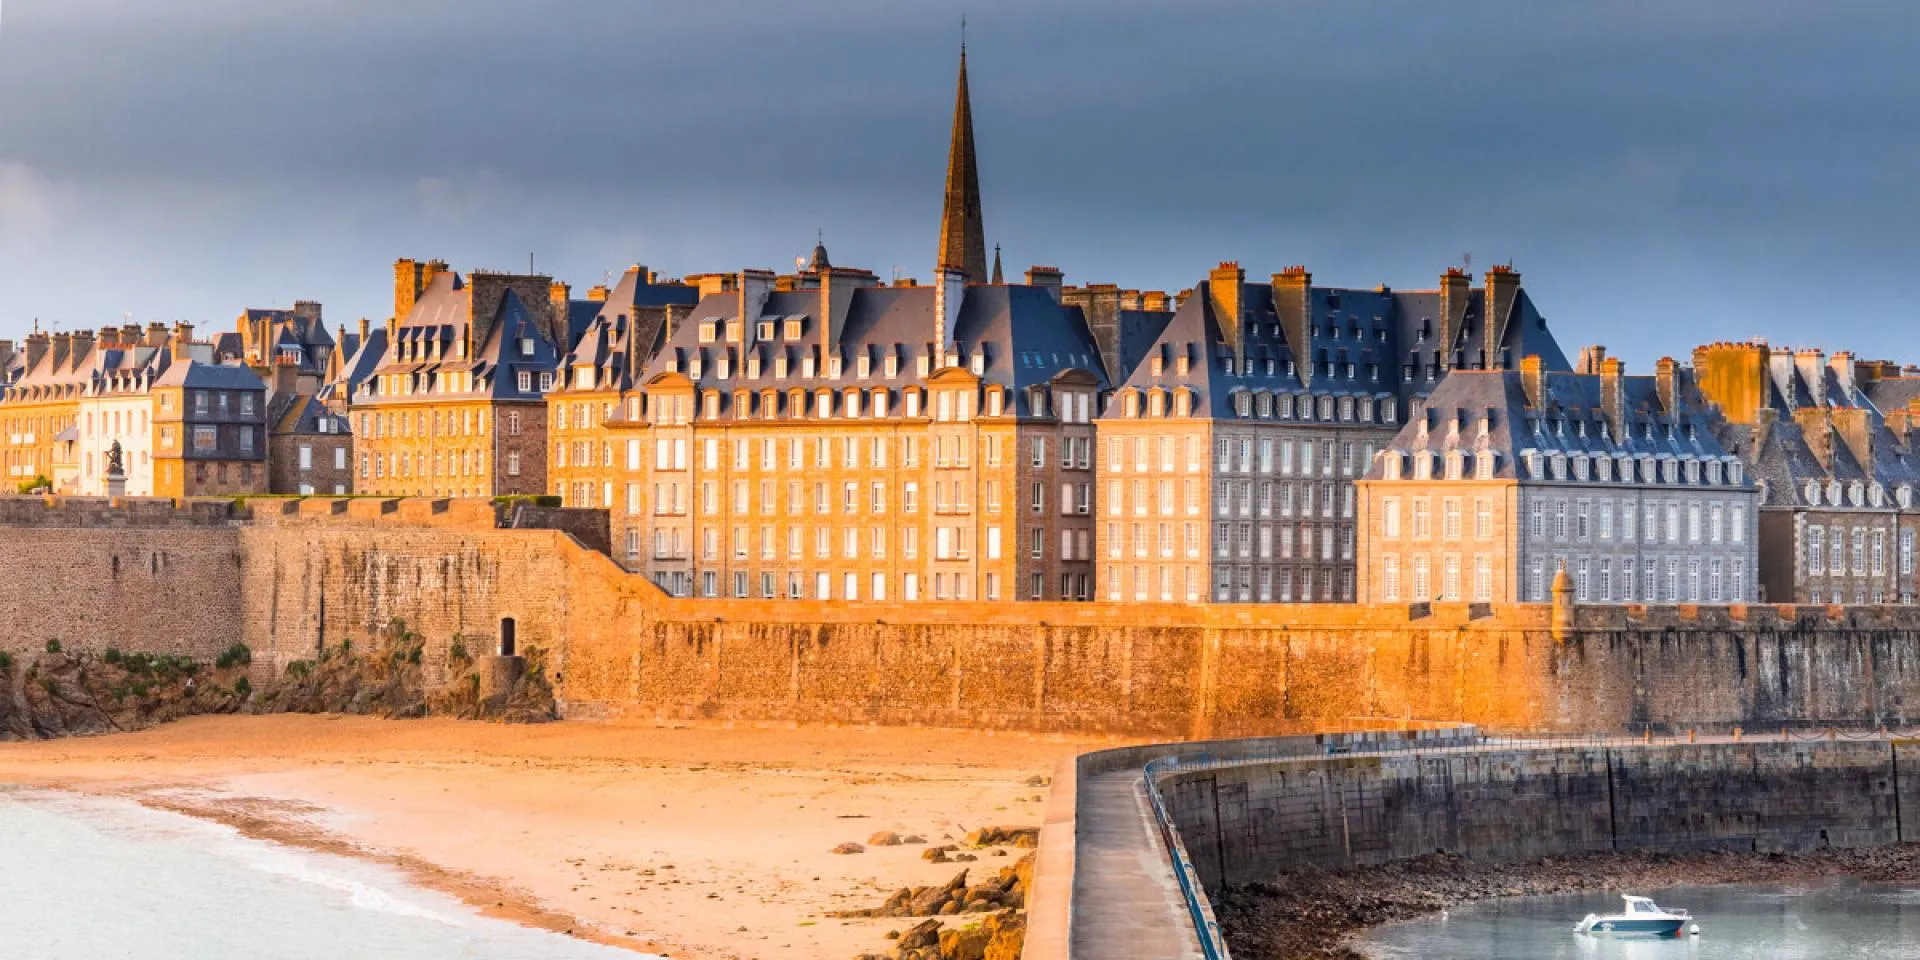 Les Ramparts de Saint Malo in France, Europe | Architecture - Rated 3.6